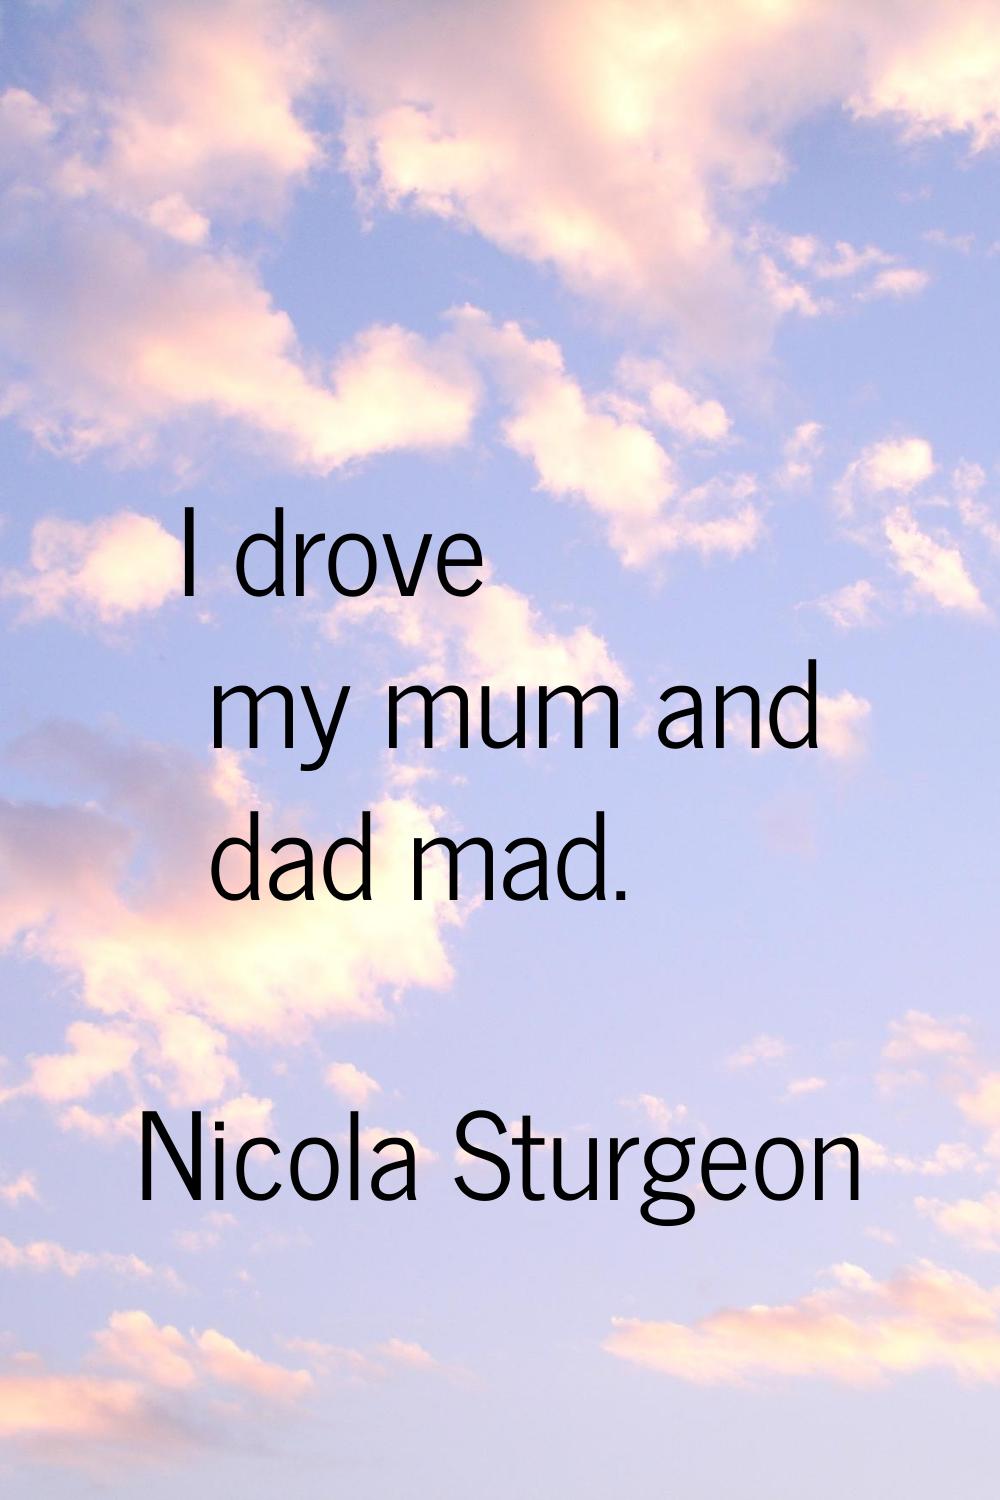 I drove my mum and dad mad.